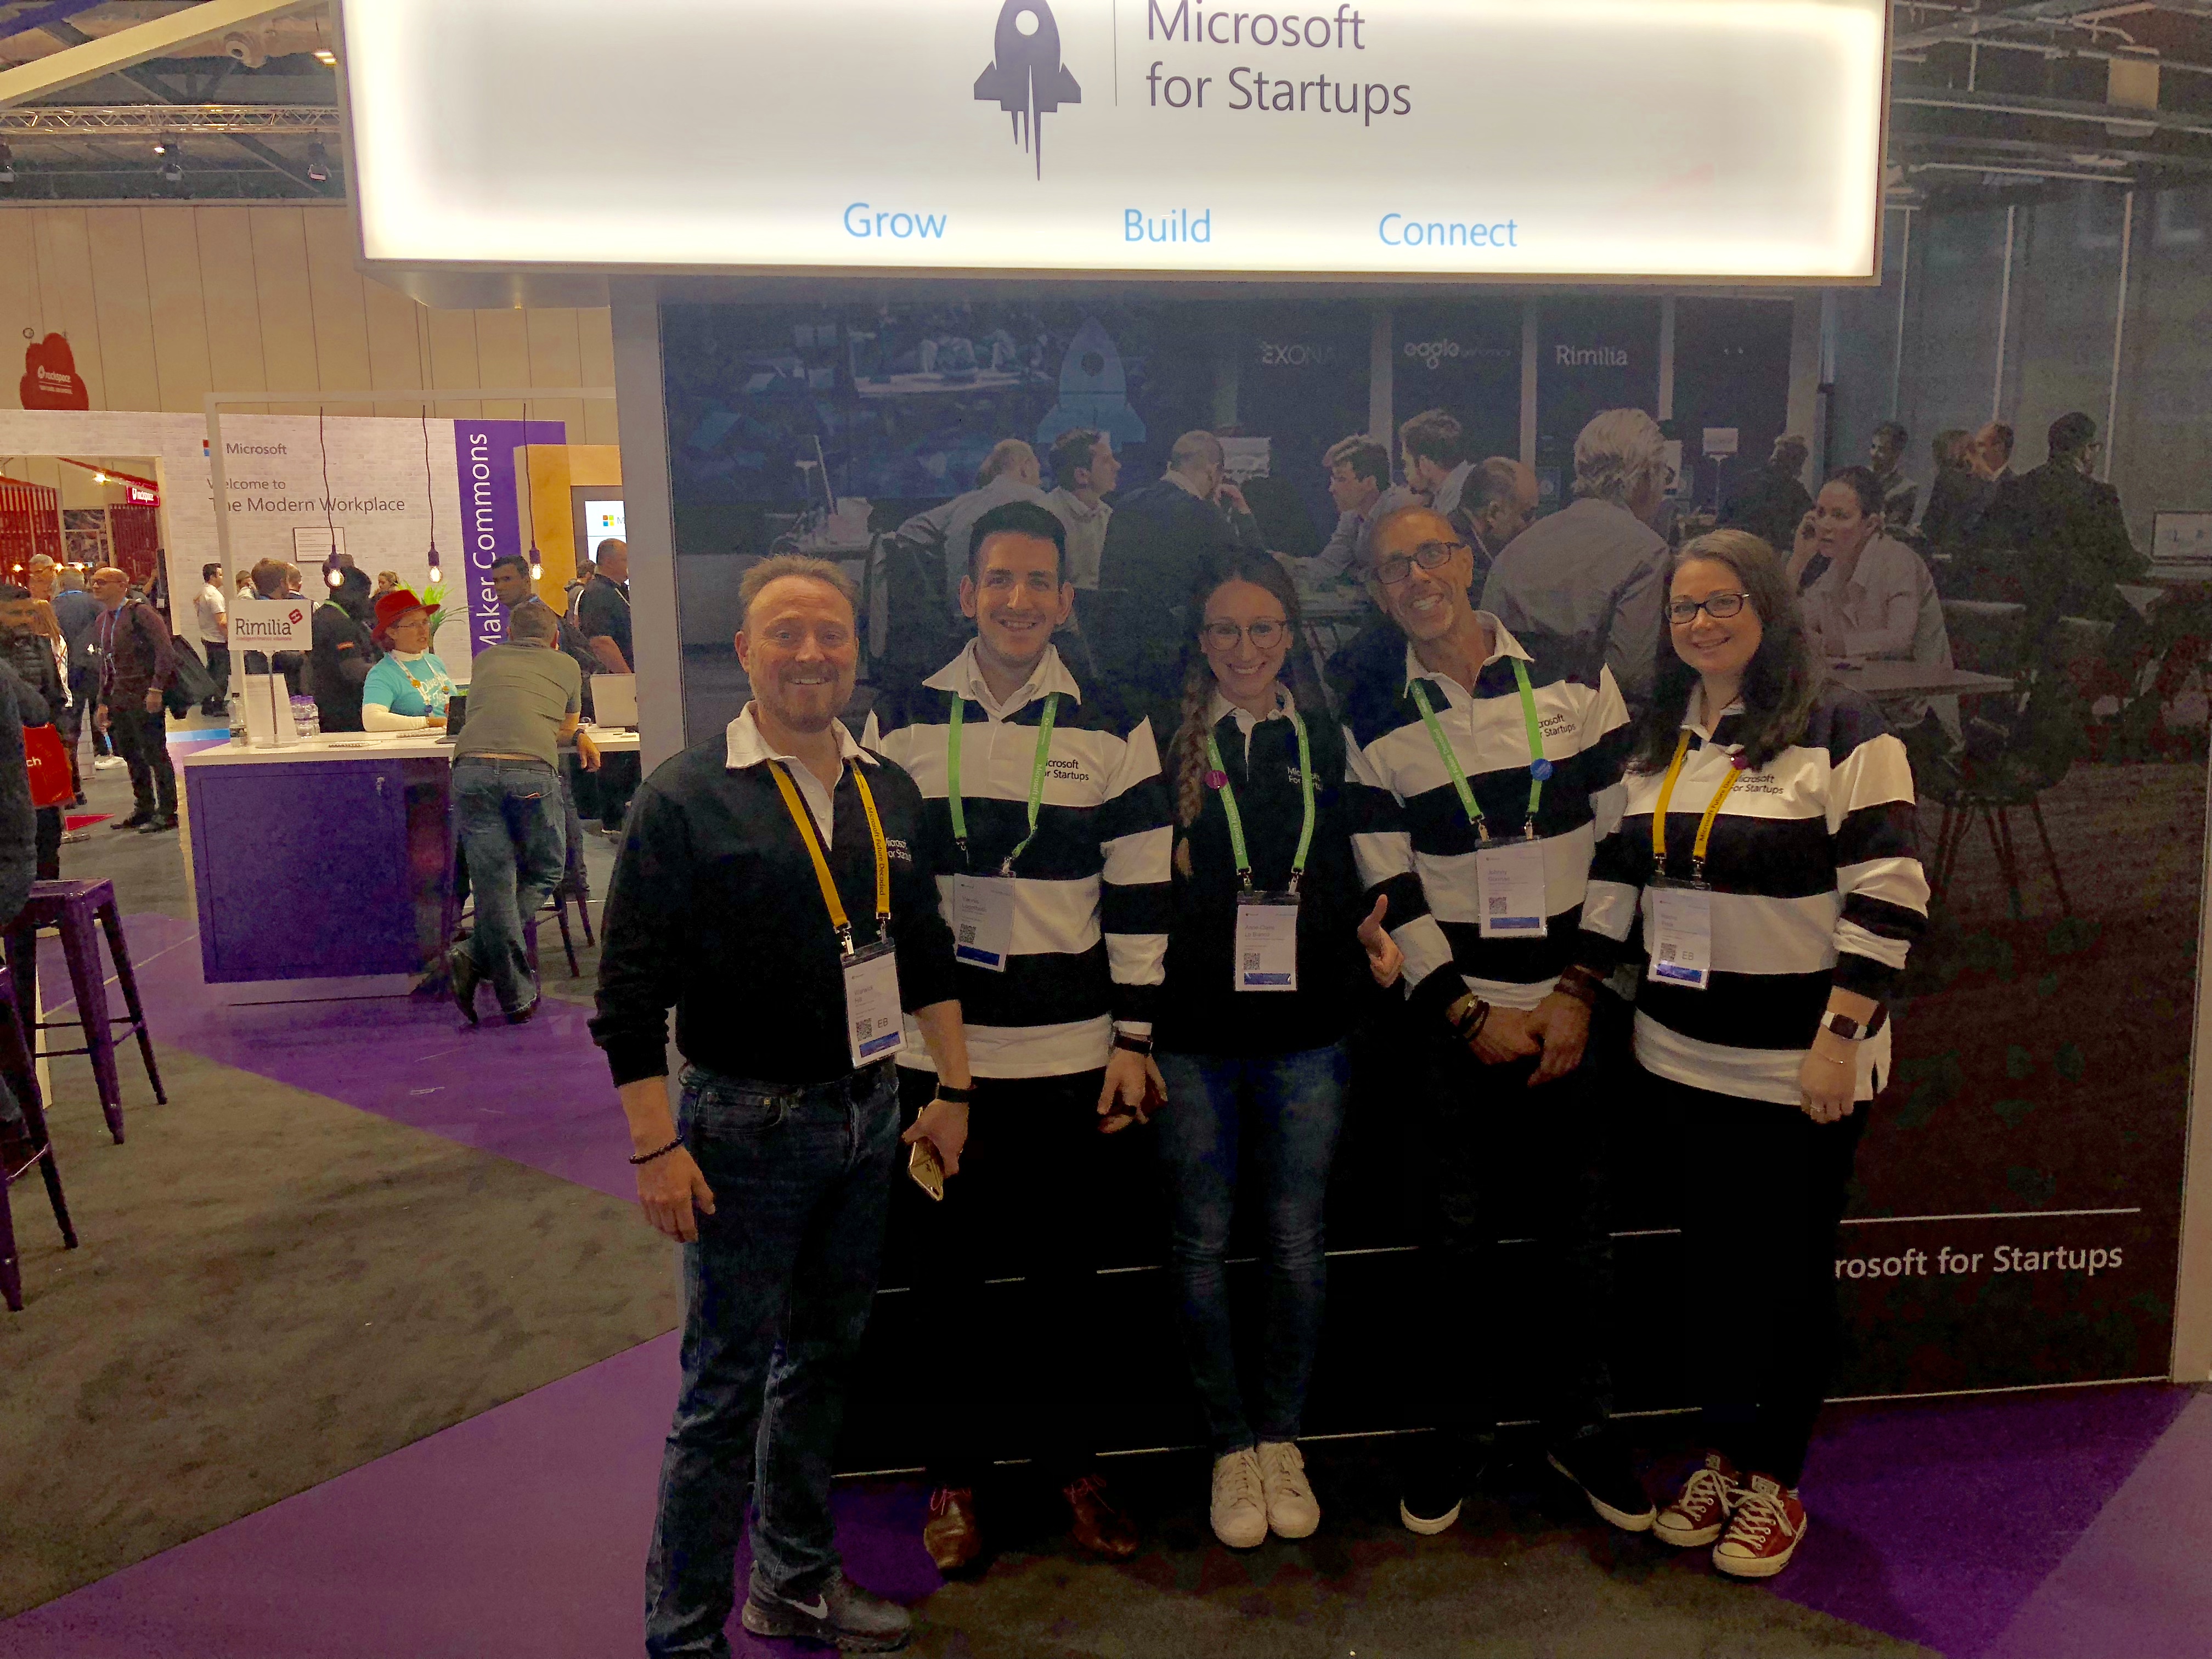 The Microsoft for StartUps team on their stand